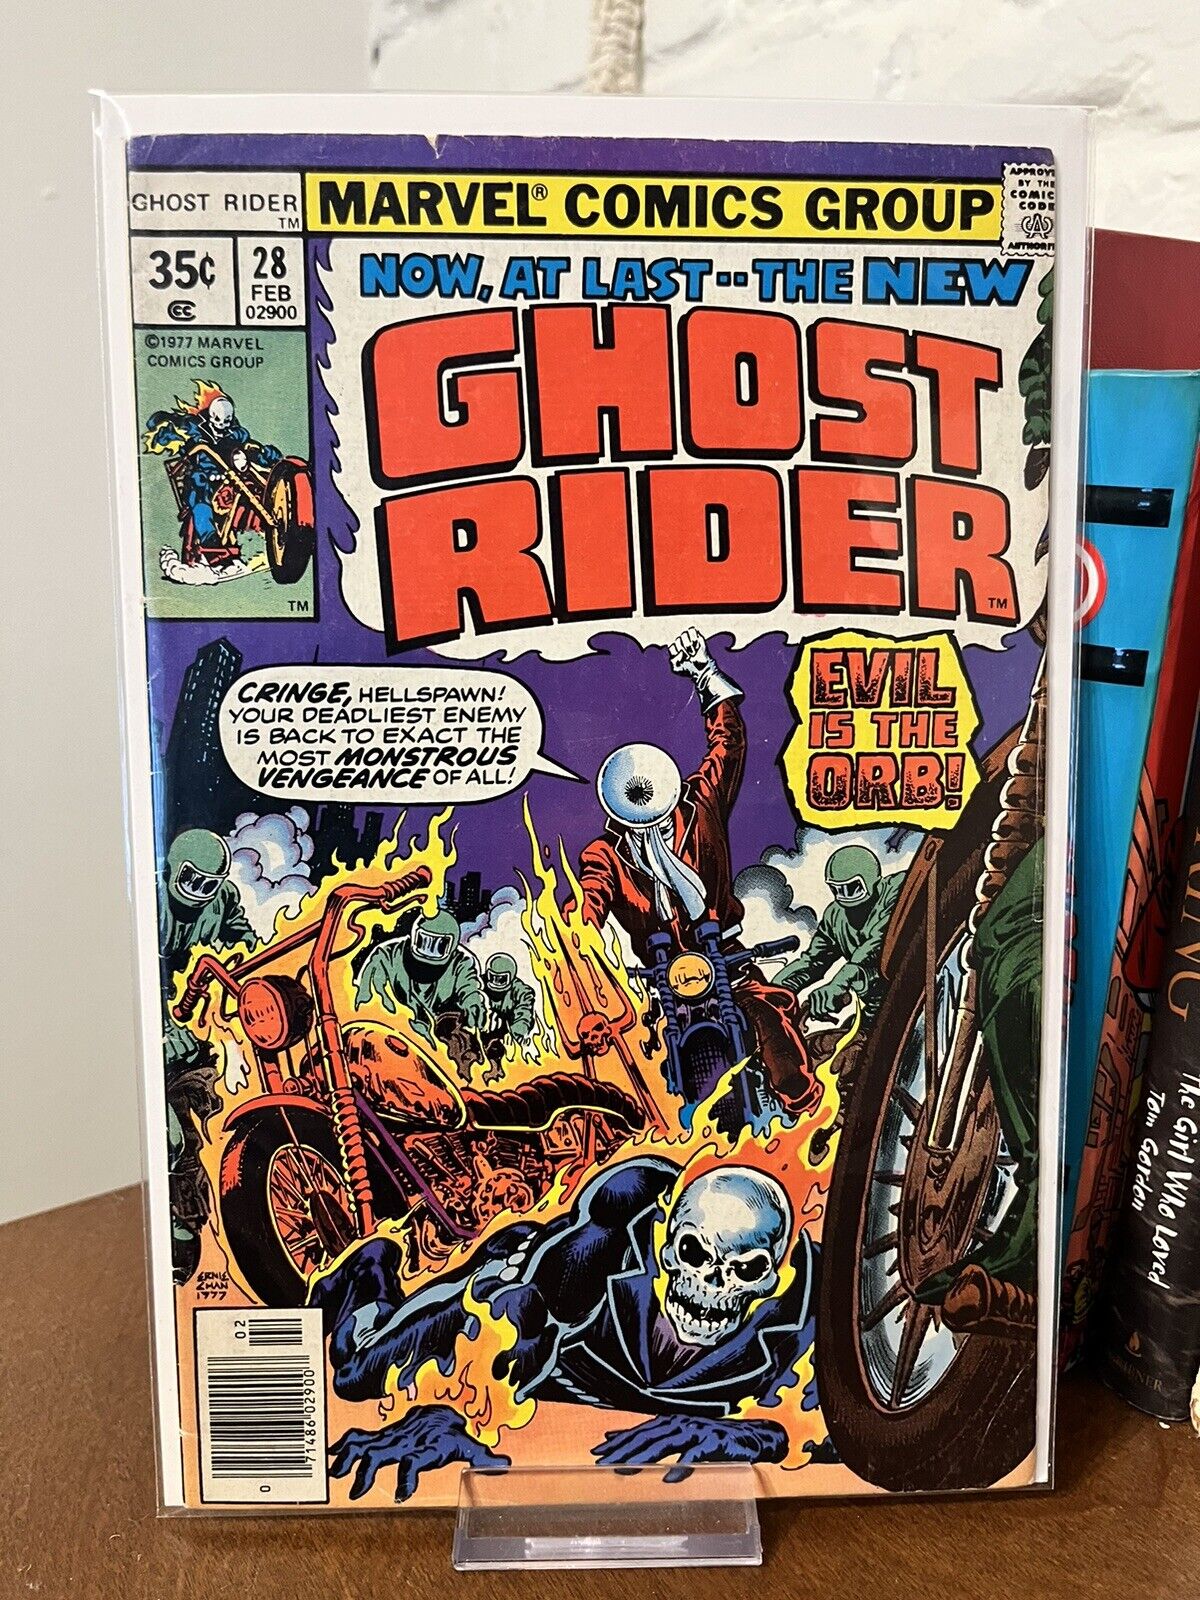 Ghost Rider #28 (Marvel Comics, 1978) “Evil is the Orb\